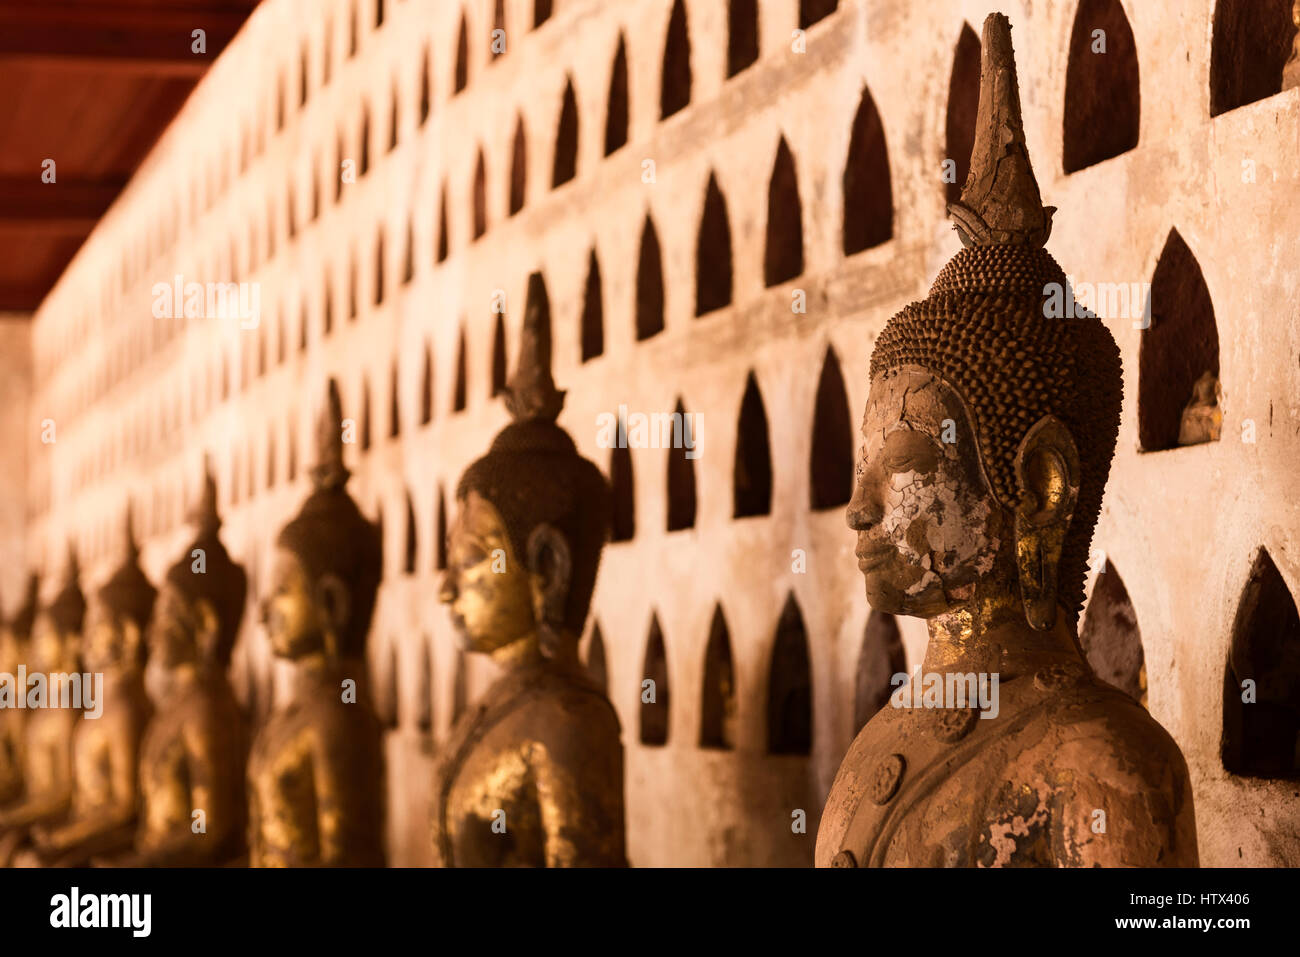 Buddha statues aligned side by side in Wat Si Saket, Vientiane, Laos Stock Photo